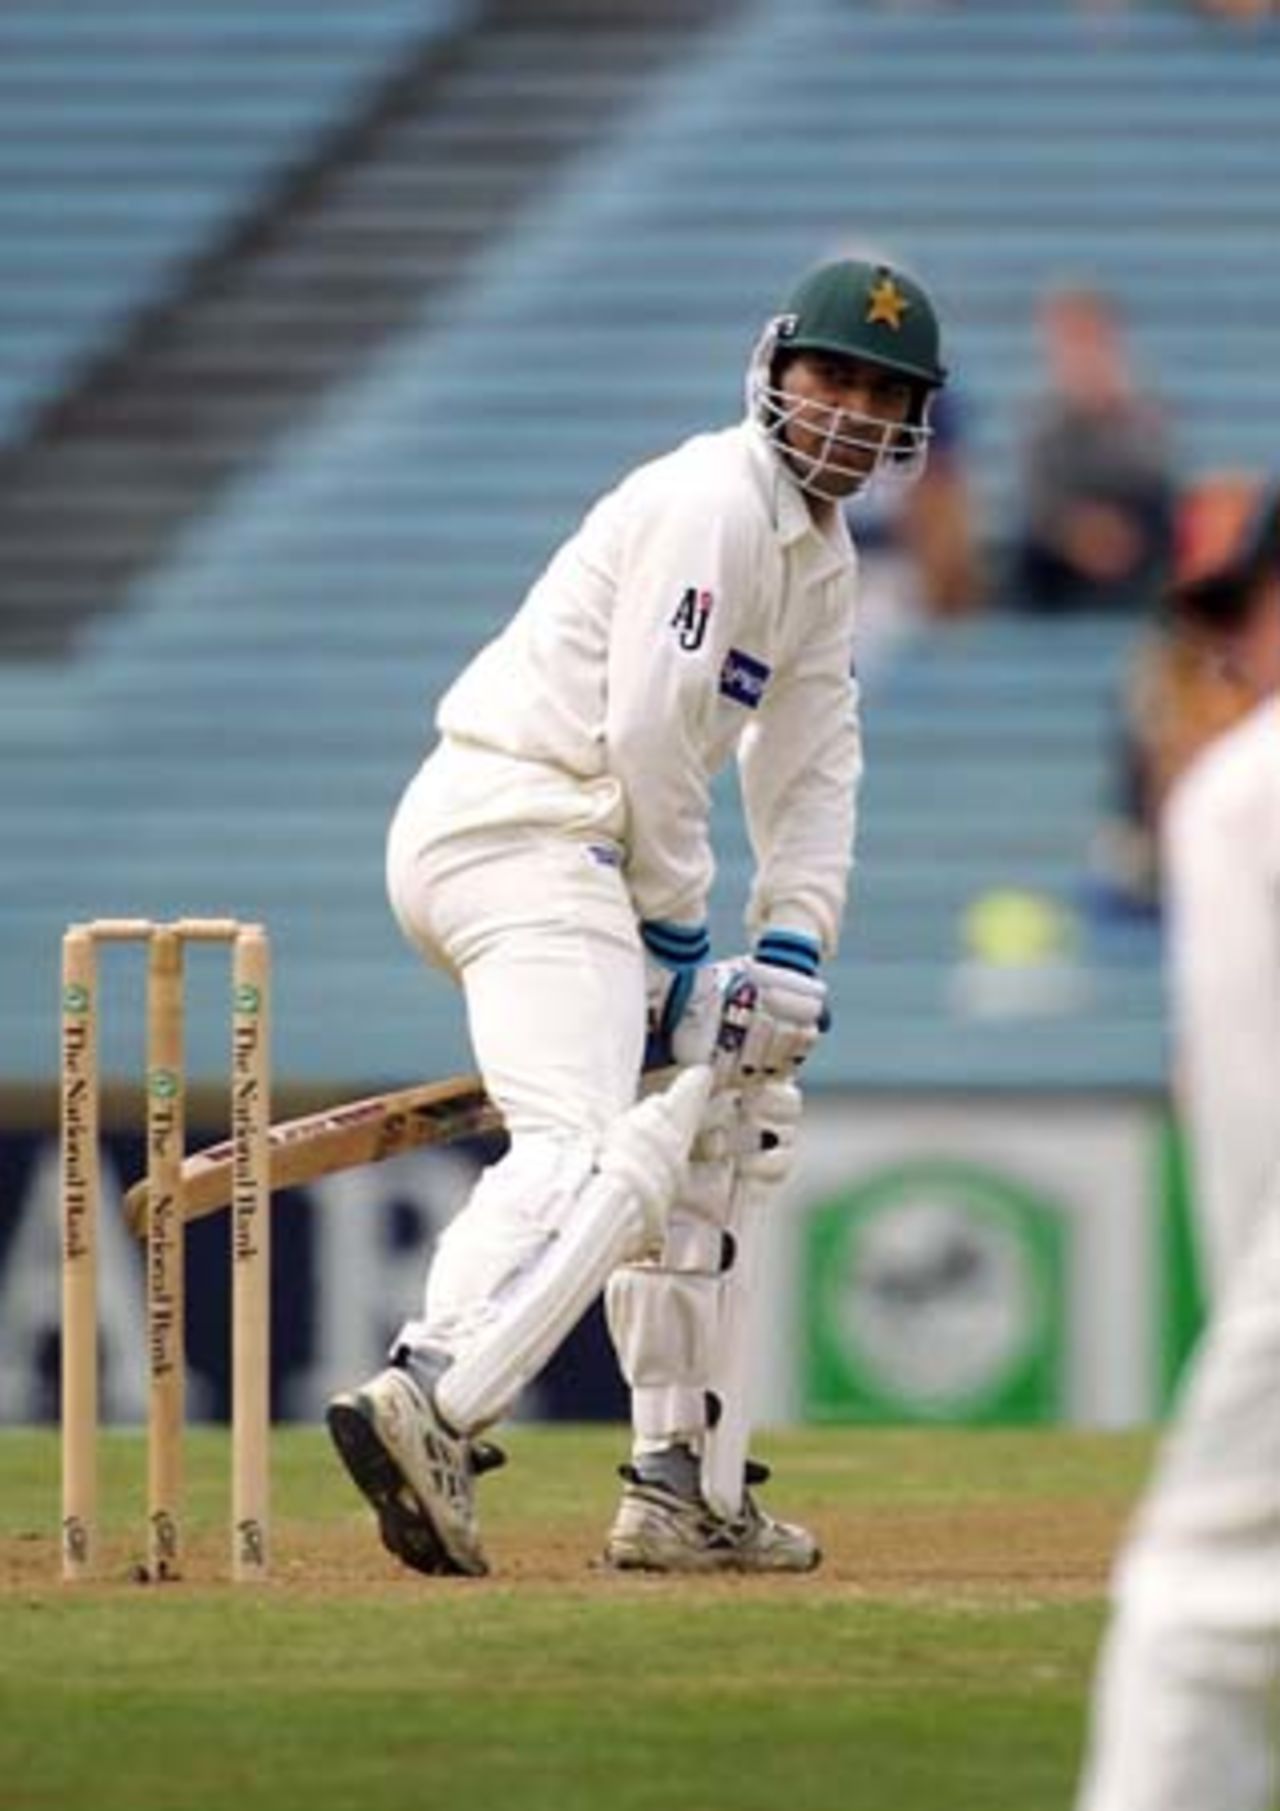 Pakistan opening batsman Saleem Elahi looks back as New Zealand wicket-keeper Adam Parore takes a catch to dismiss him off the bowling of fast medium bowler Daryl Tuffey for 24. 1st Test: New Zealand v Pakistan at Eden Park, Auckland, 8-12 March 2001 (8 March 2001).